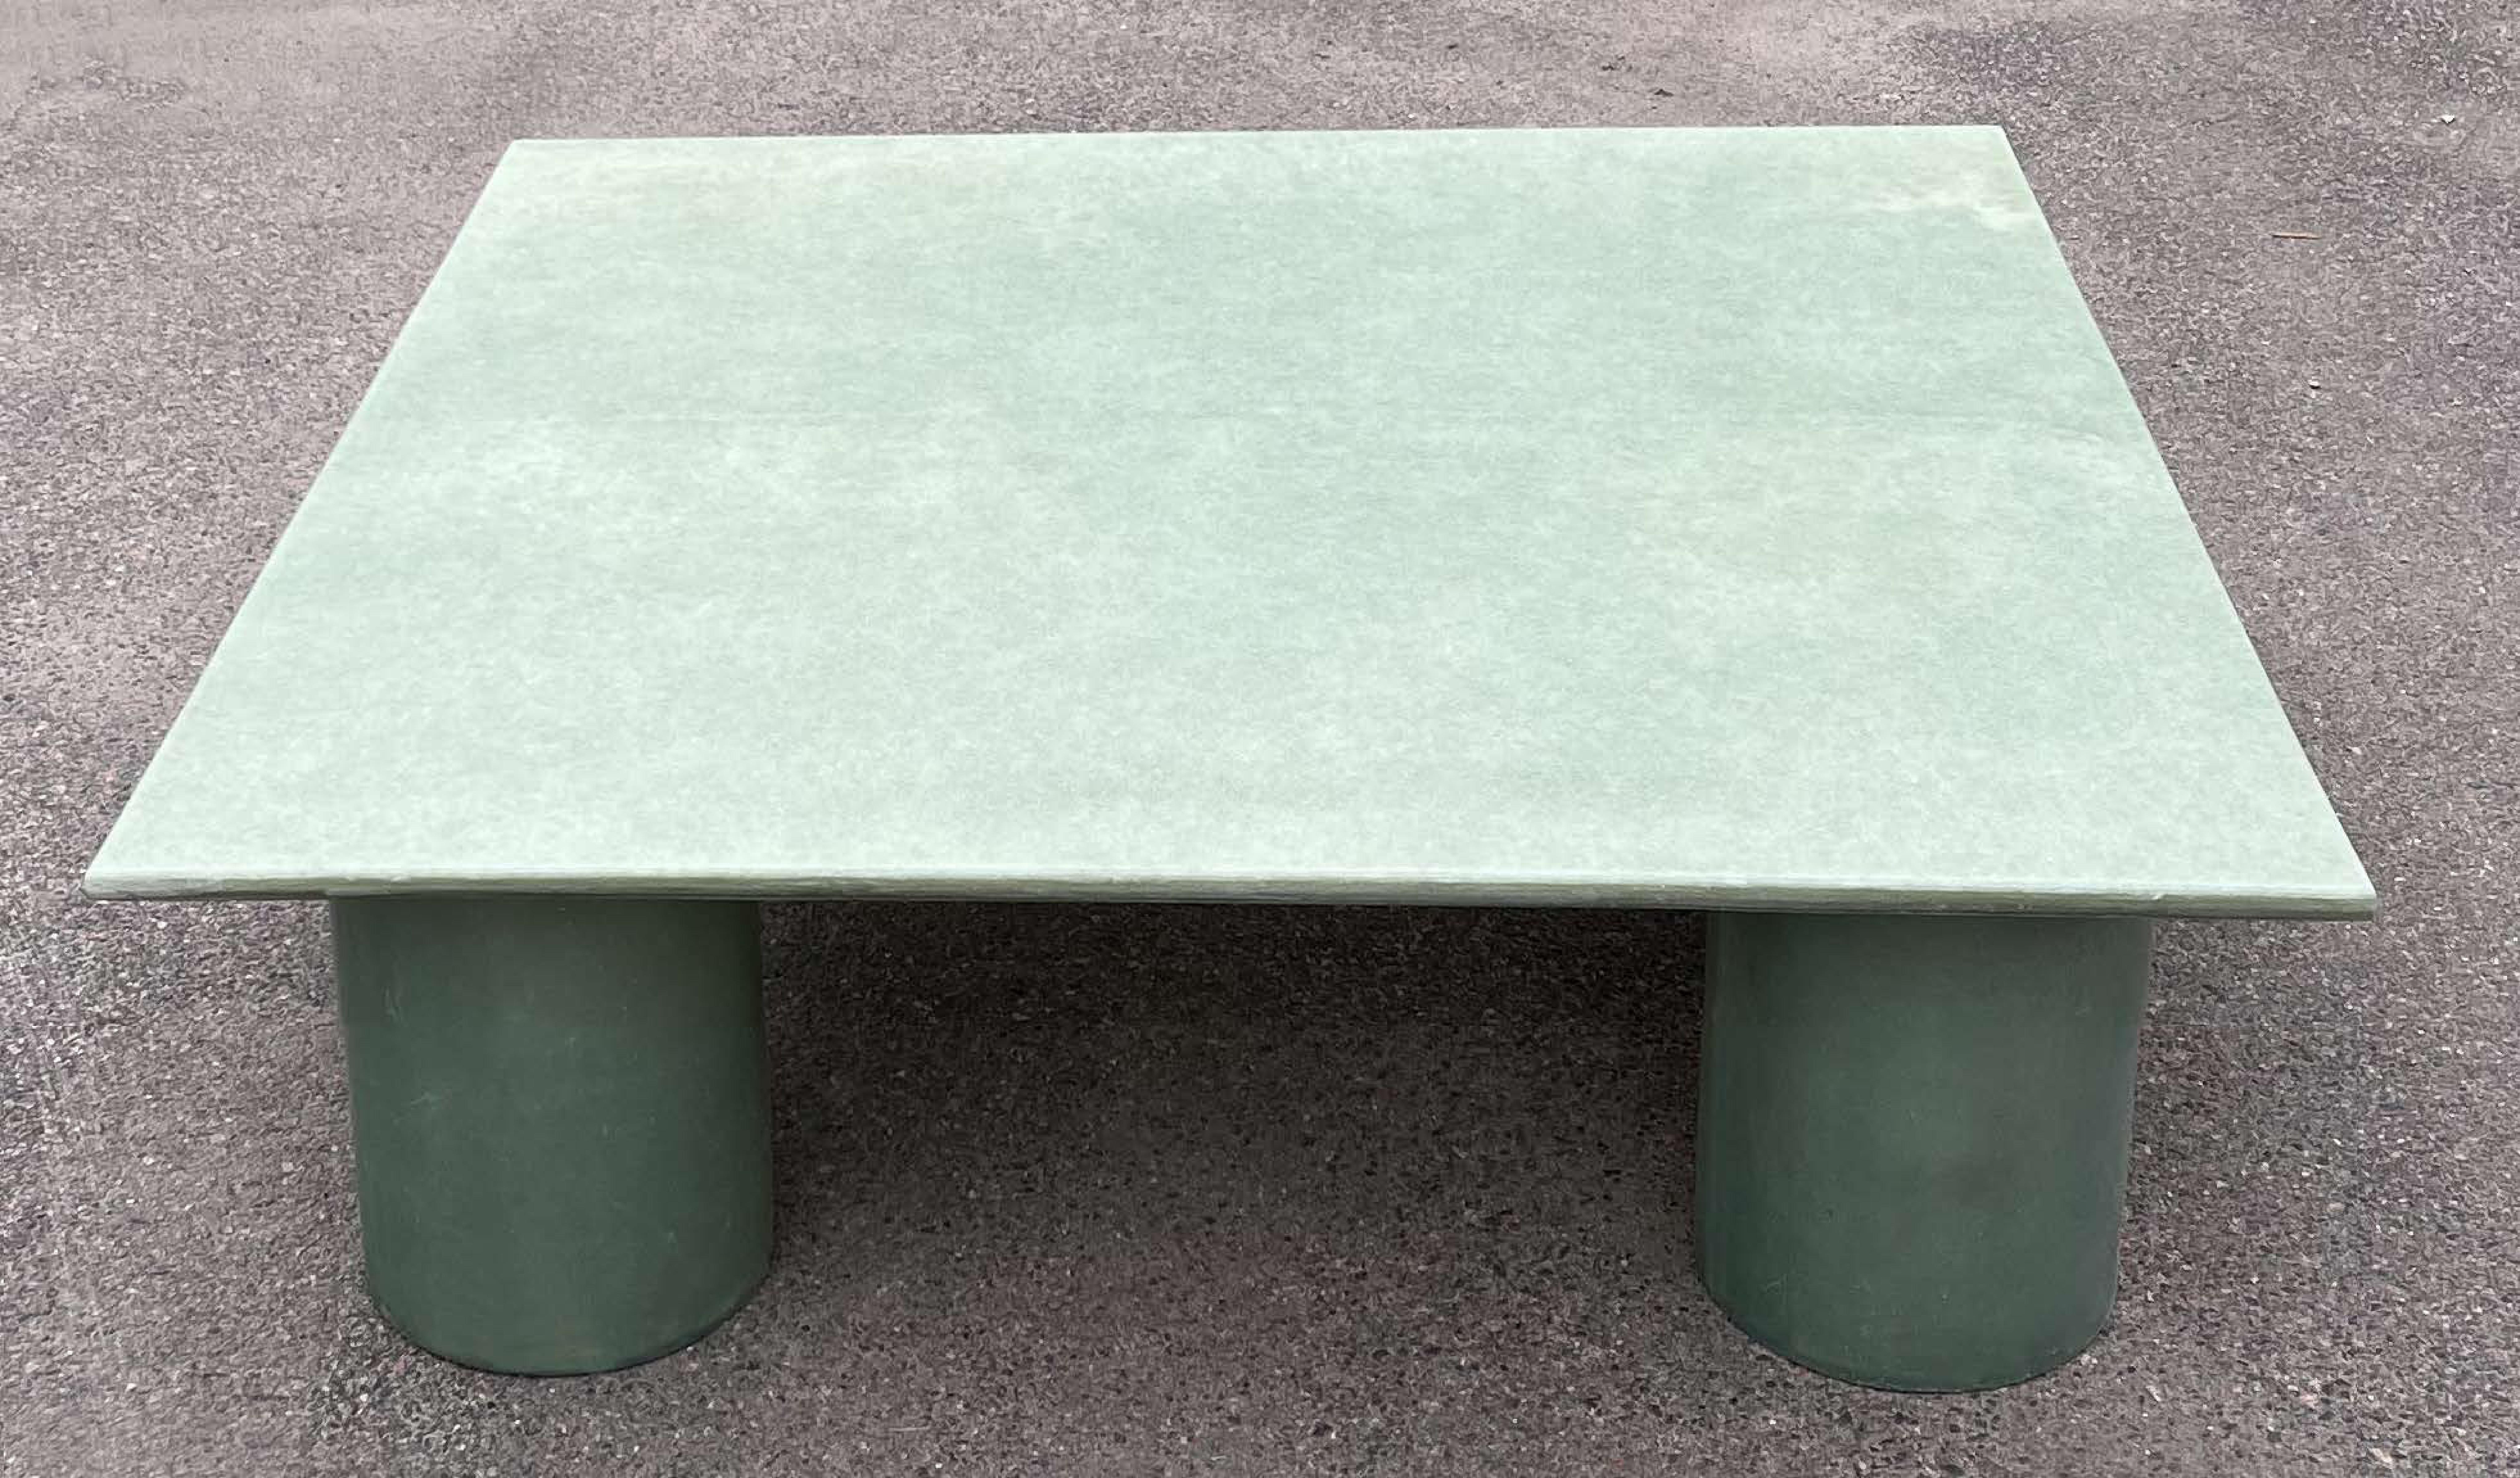 VAVA OBJECTS 

Fiberglass Table, 2022

Fiberglass is an extremely durable material that withstand the forces of time and pressure. VAVA OBEJCTS like to leave it unmasked and play with its natural transparency to give the material life.

H35 x L120 x